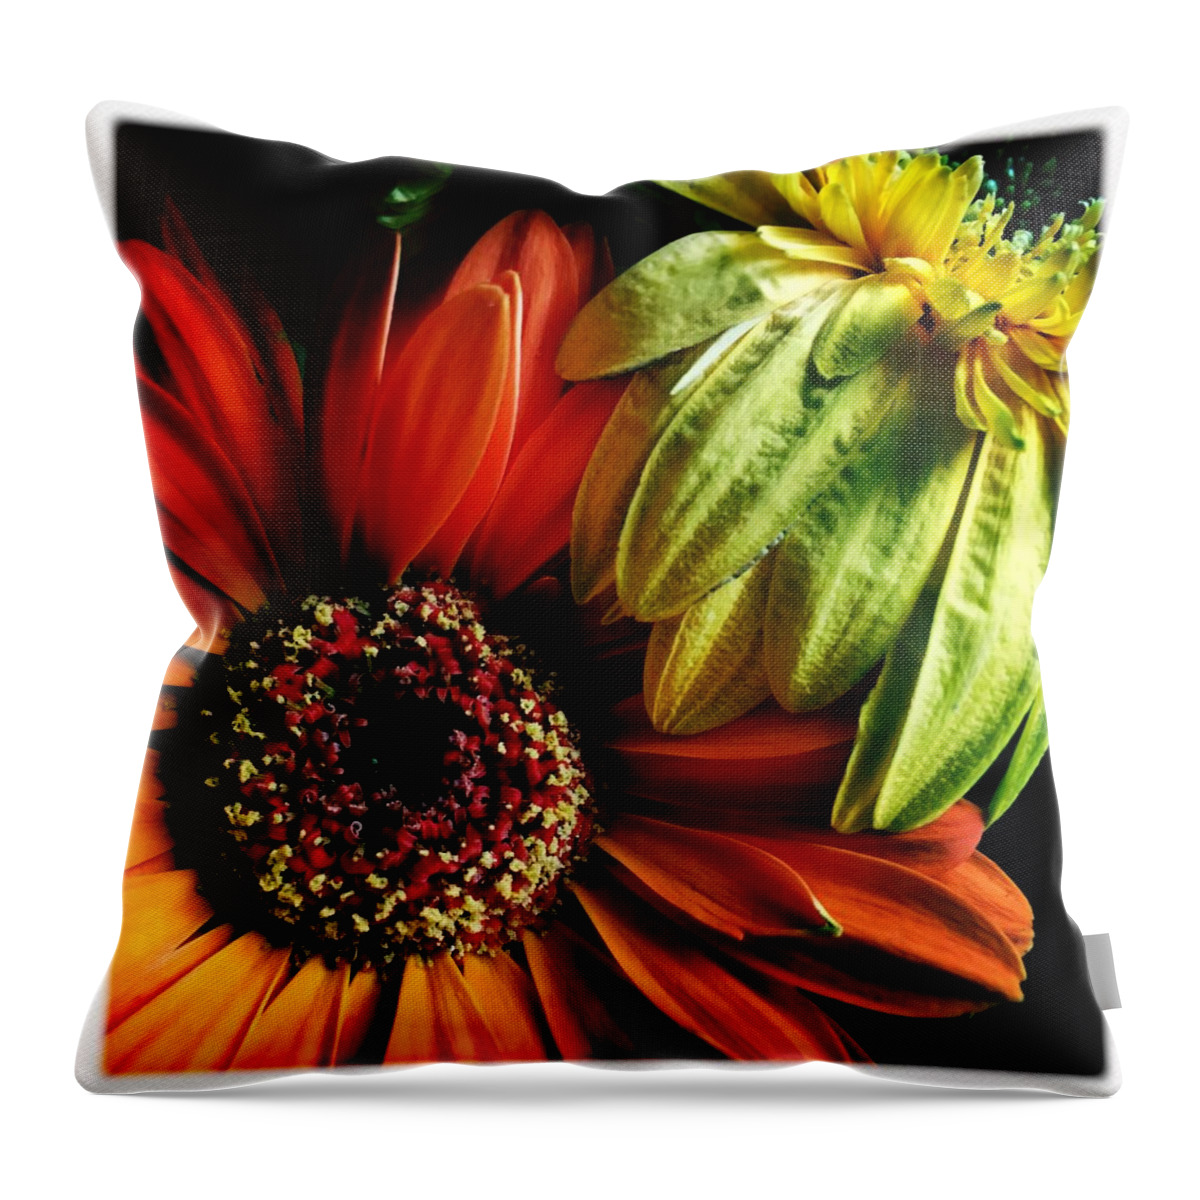 Flowers Throw Pillow featuring the photograph Still Life by Anne Thurston